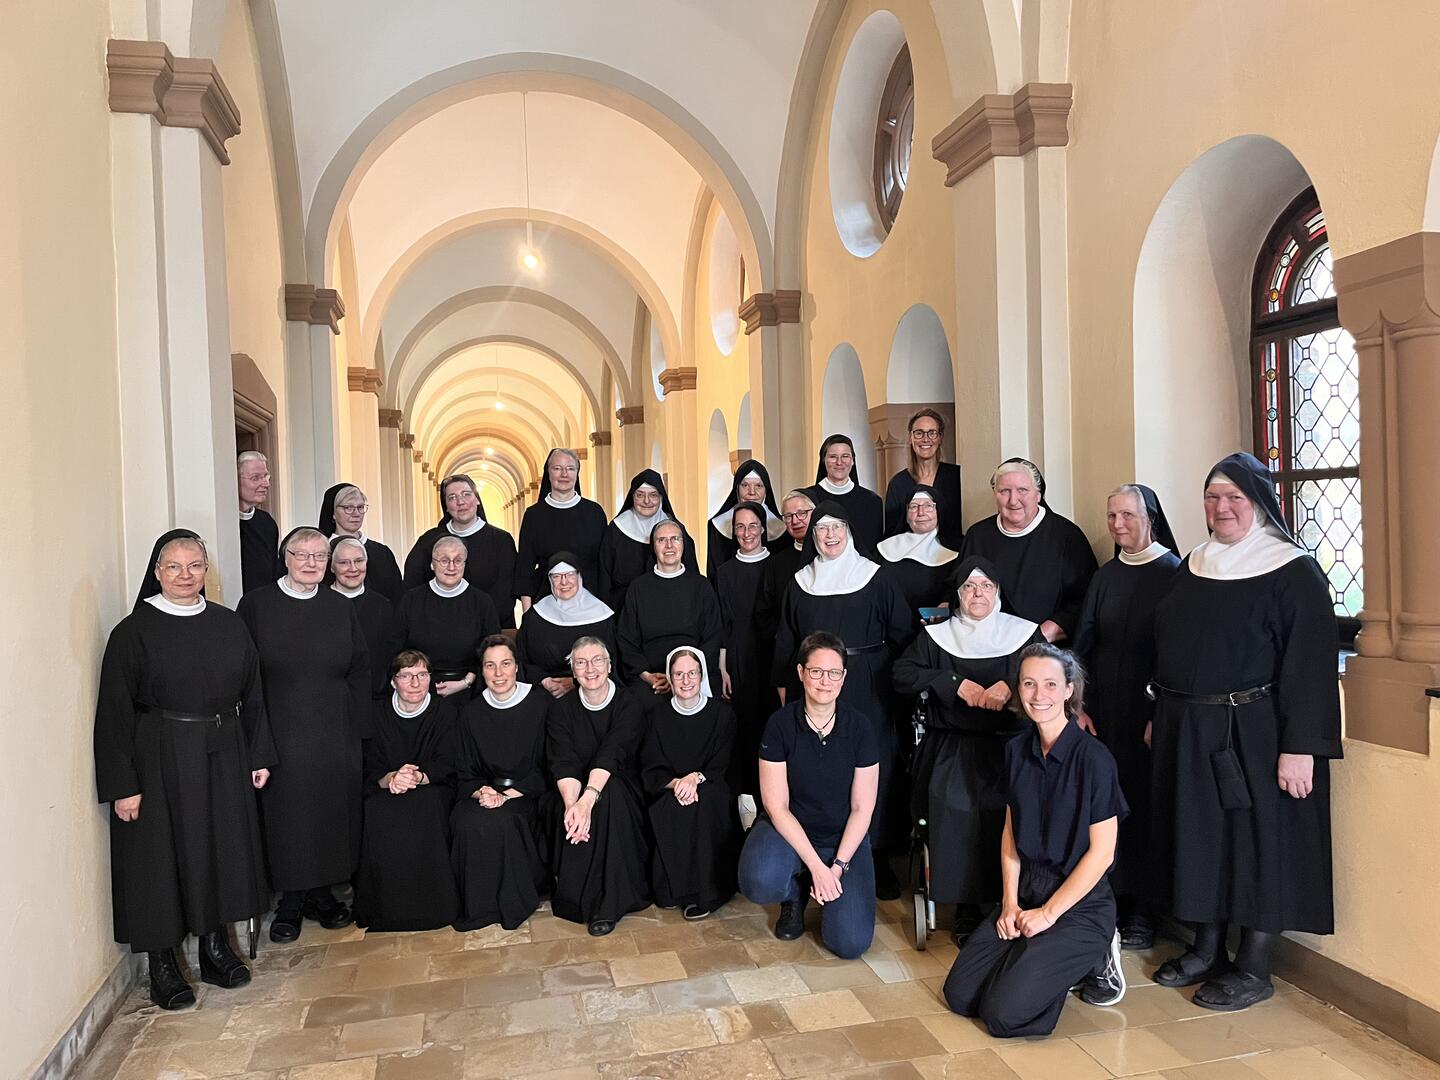 Group photography of Benedictine nuns of the Abbey of St. Hildegard in the Rheingau